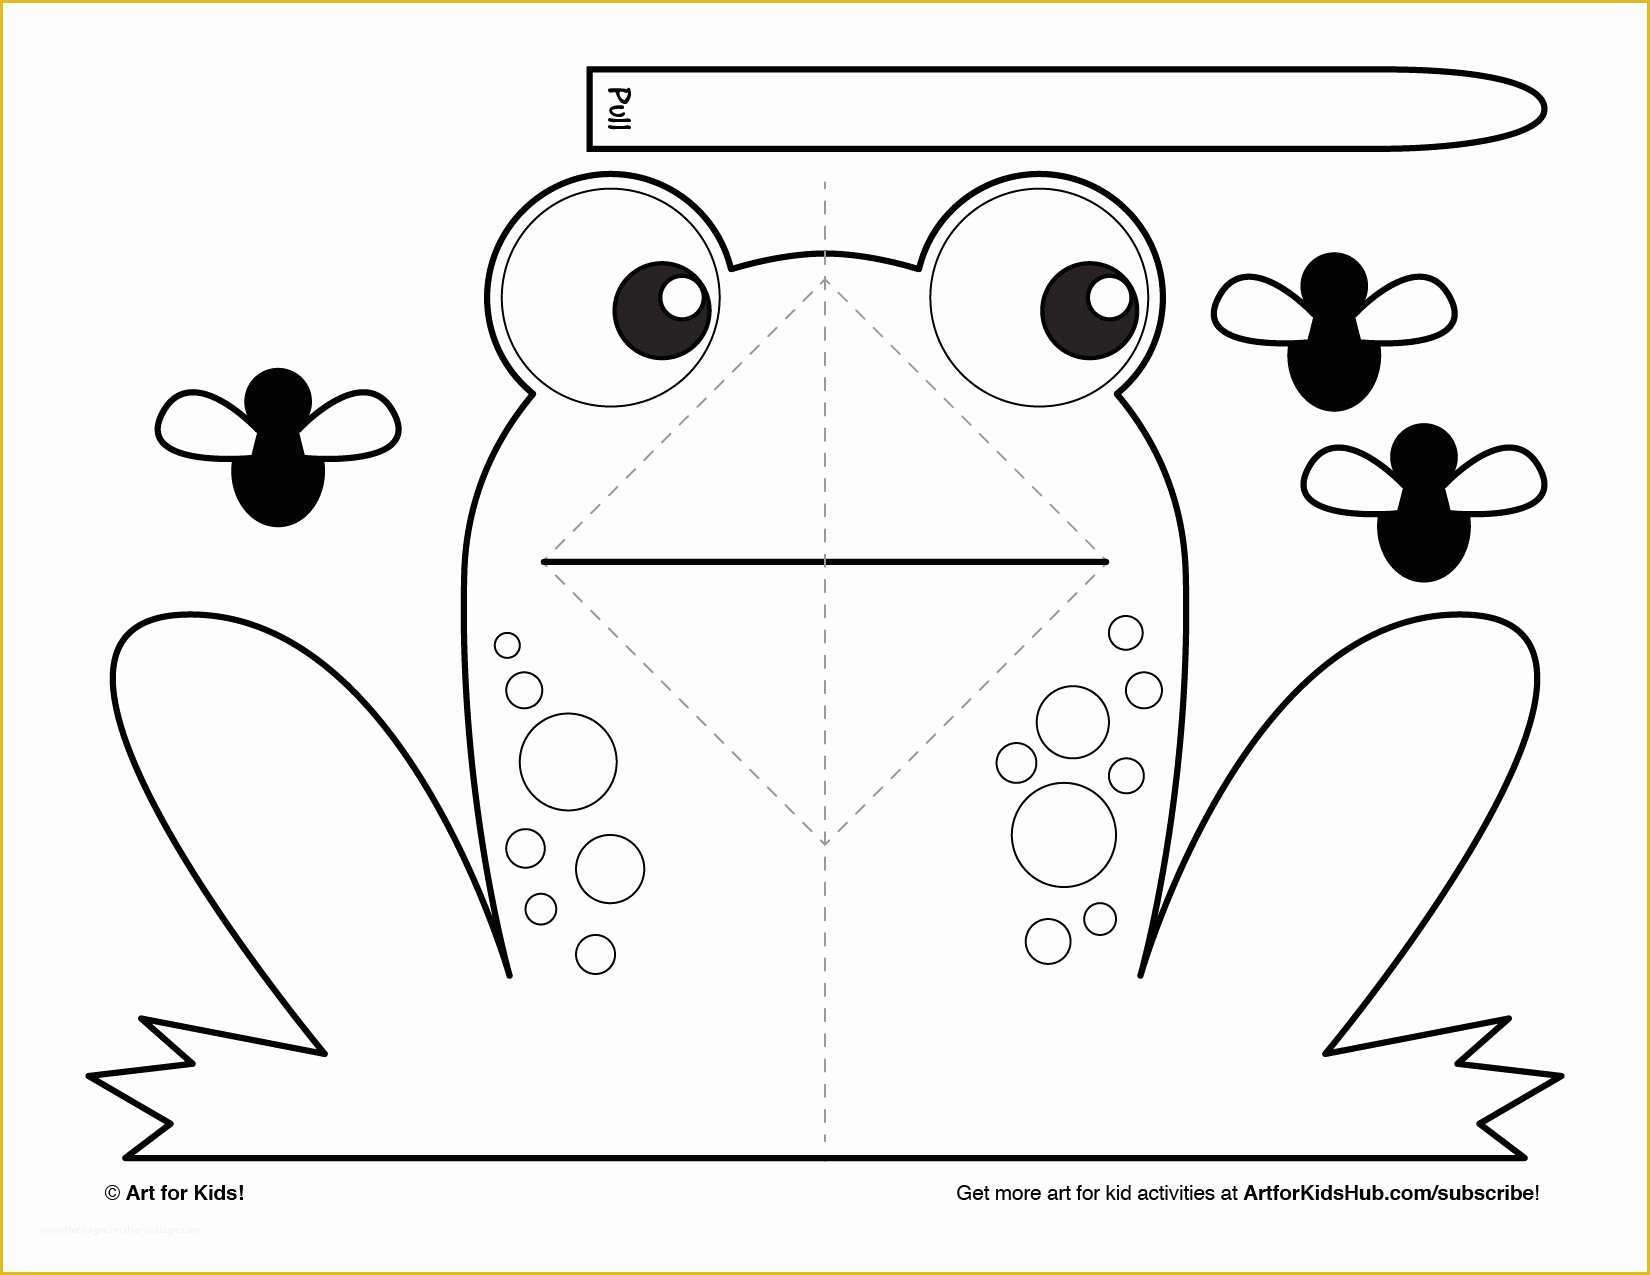 pop-up-card-templates-free-download-of-easy-pop-up-frog-art-for-kids